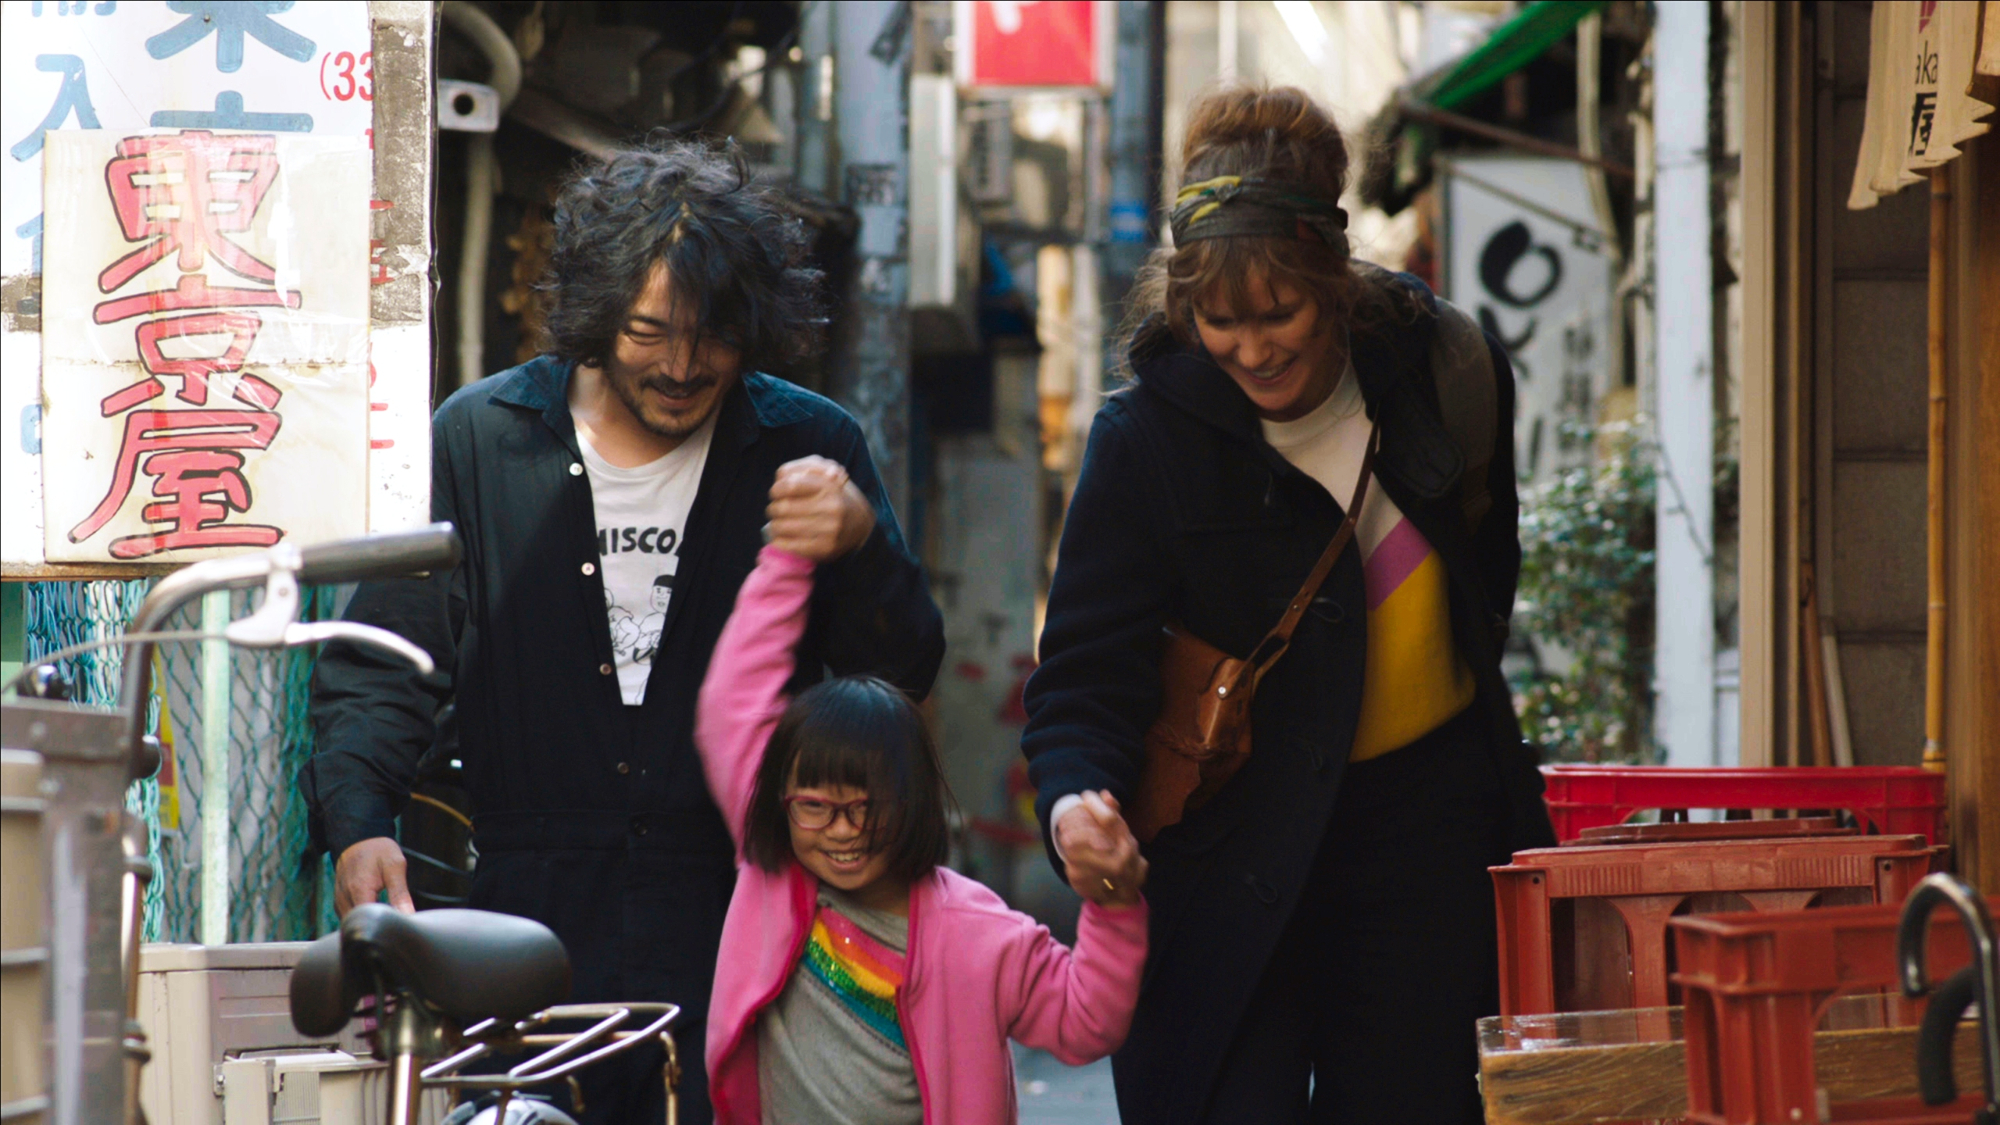 'Blood' review Takashi Ueno as Toshi and Carla Juri as Chloe holding hands of young girl walking on path